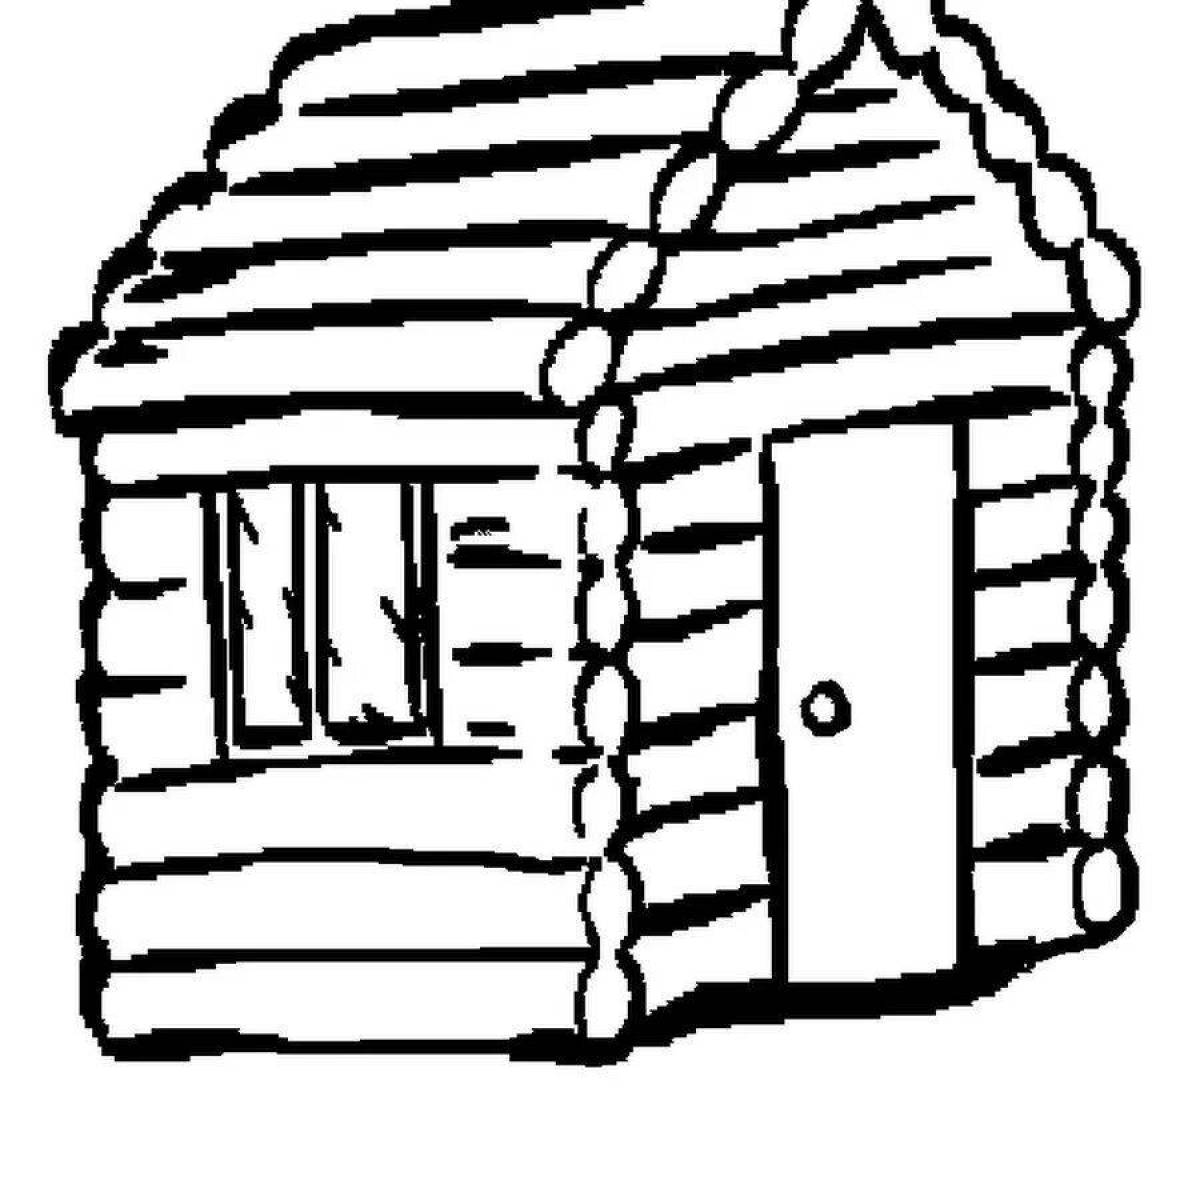 Shiny hut coloring book for kids